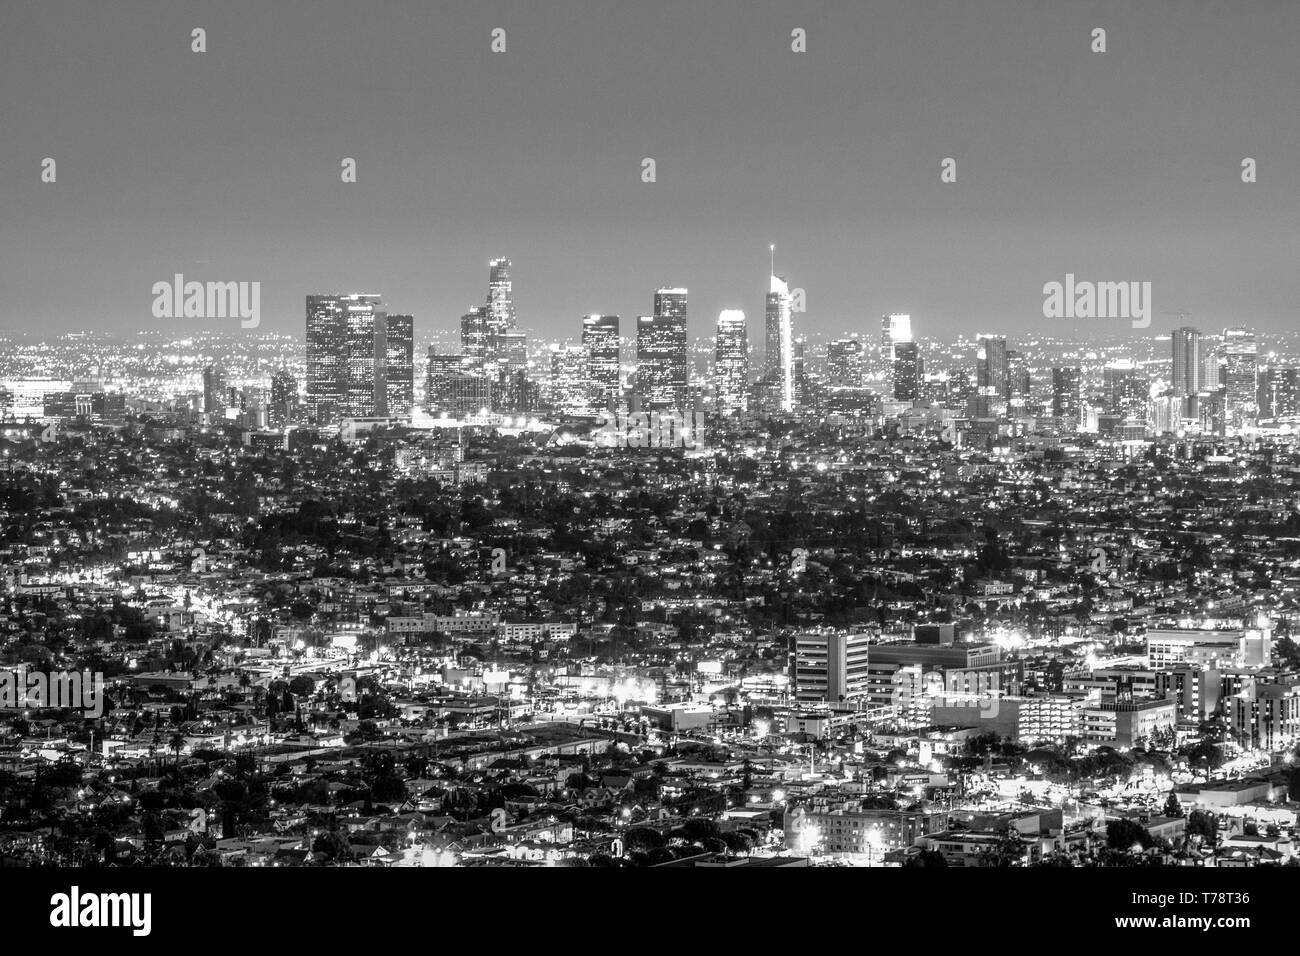 Downtown Los Angeles by night - aerial view Stock Photo